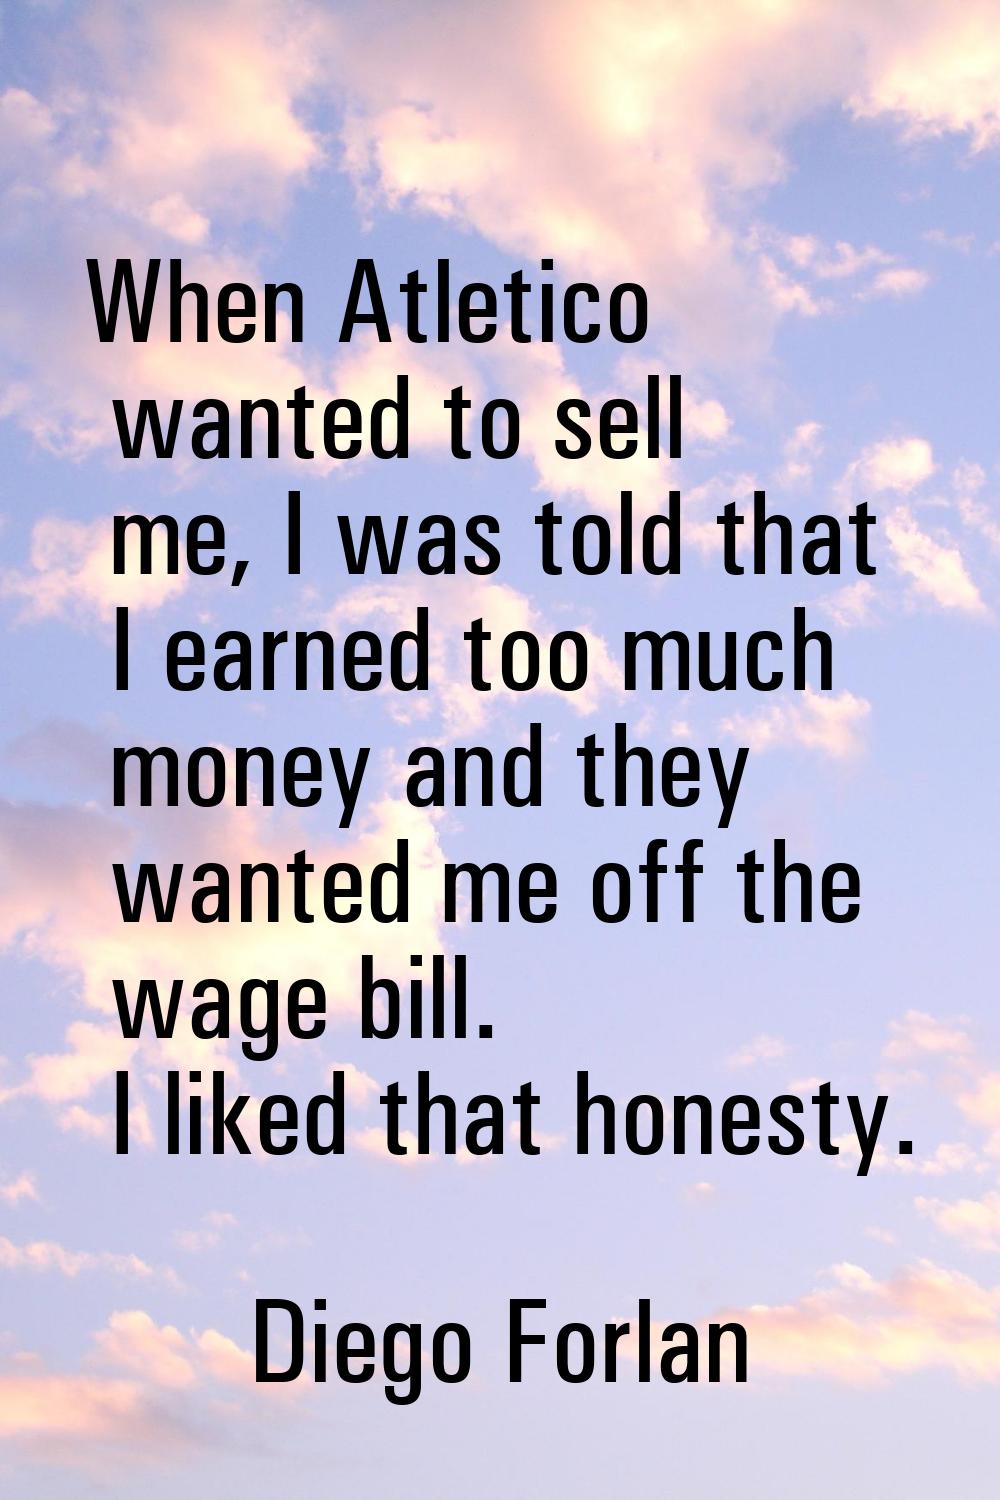 When Atletico wanted to sell me, I was told that I earned too much money and they wanted me off the